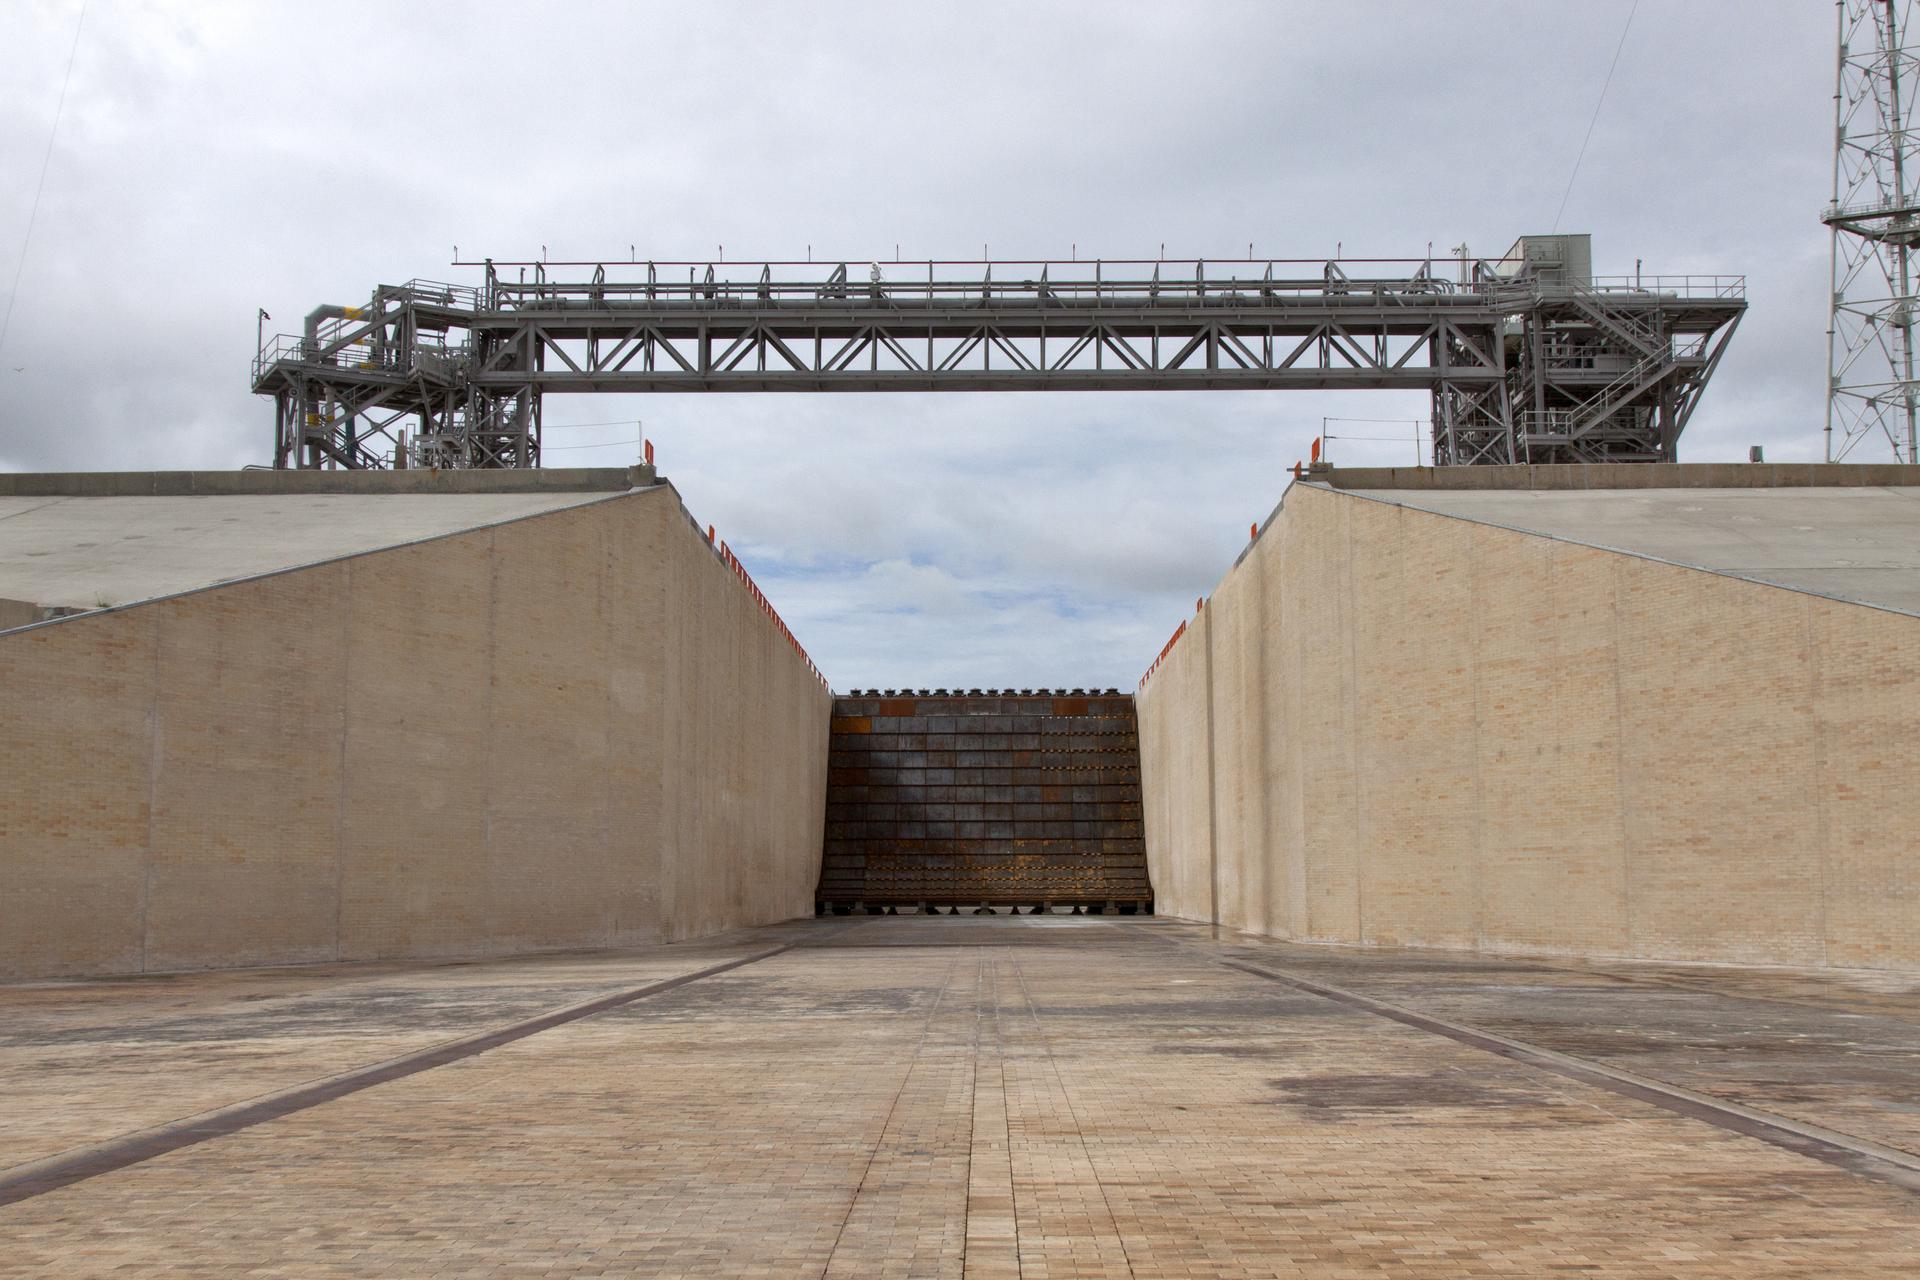 A view of the main flame deflector and flame trench at Launch Pad 39B at NASA's Kennedy Space Center in Florida.